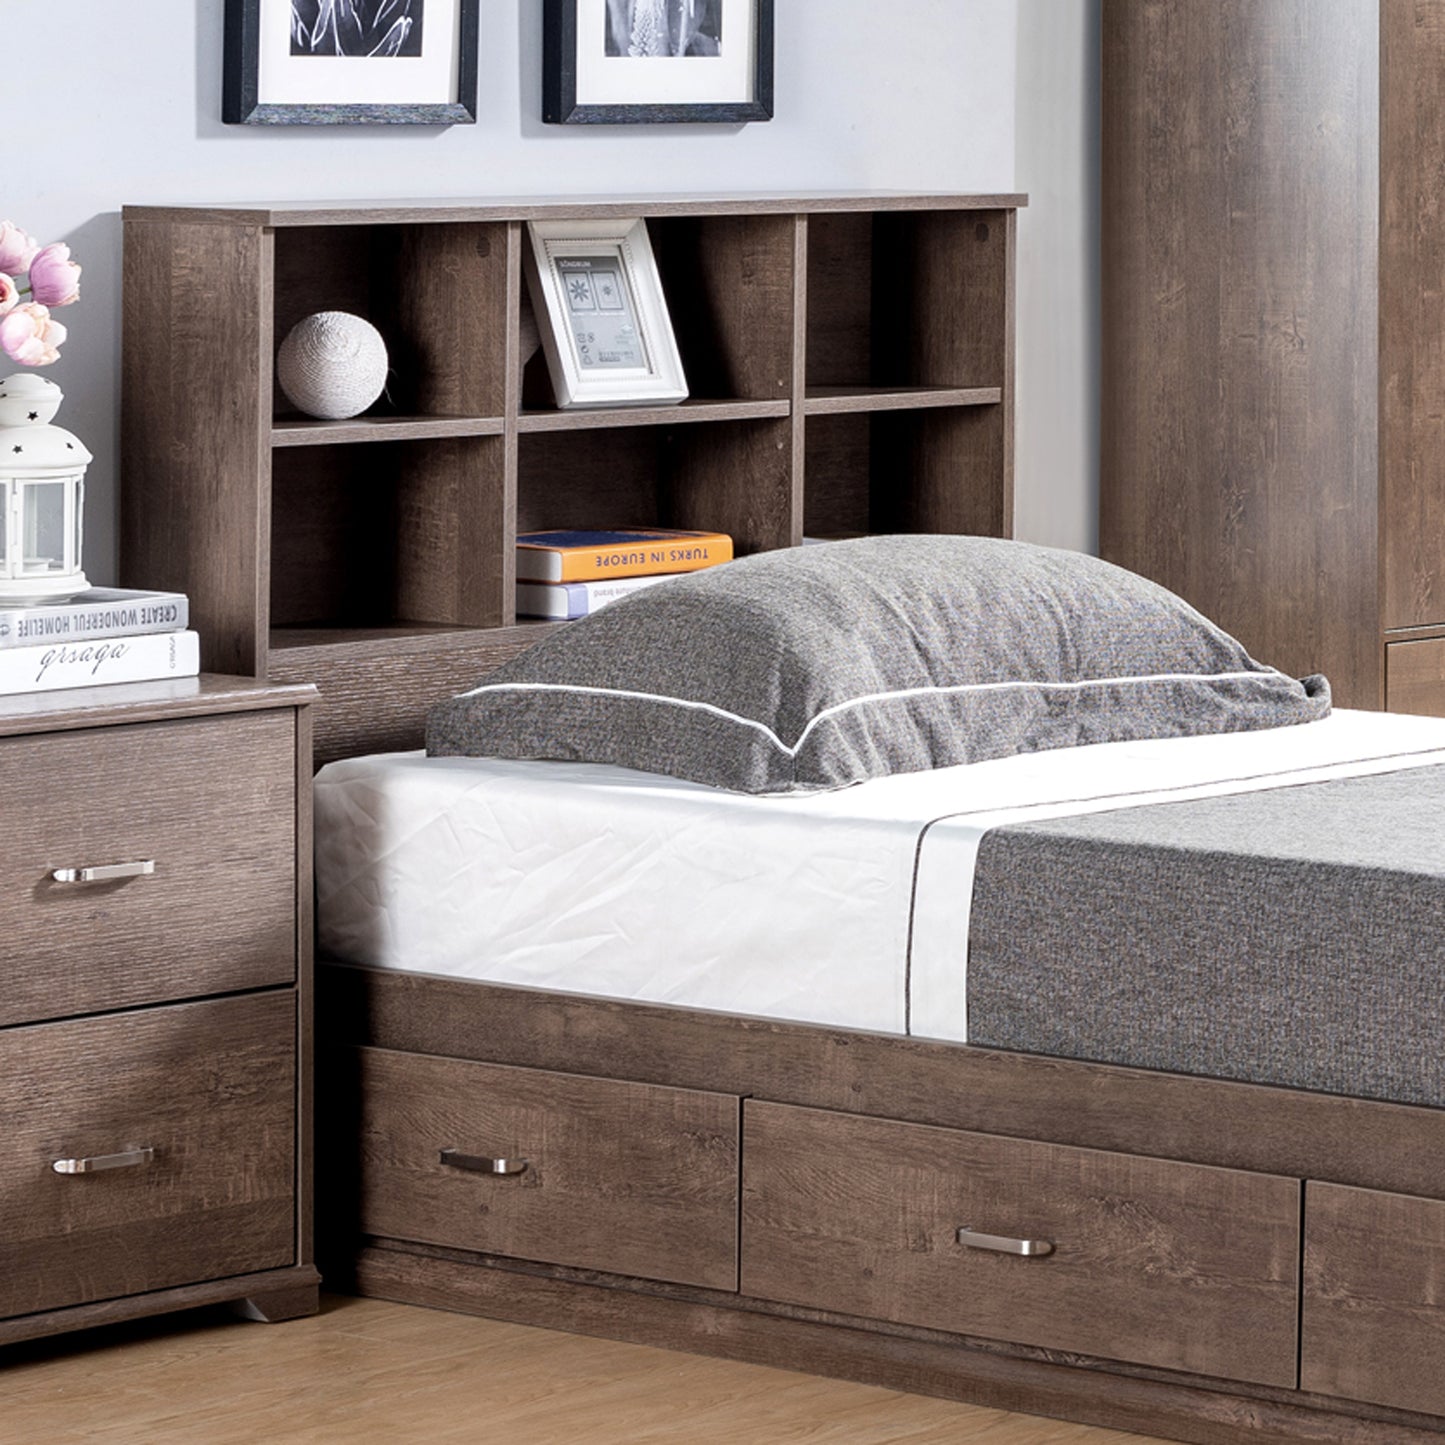 Right angled close-up of a contemporary walnut three-drawer platform storage bed with a bookcase headboard in a bedroom with accessories